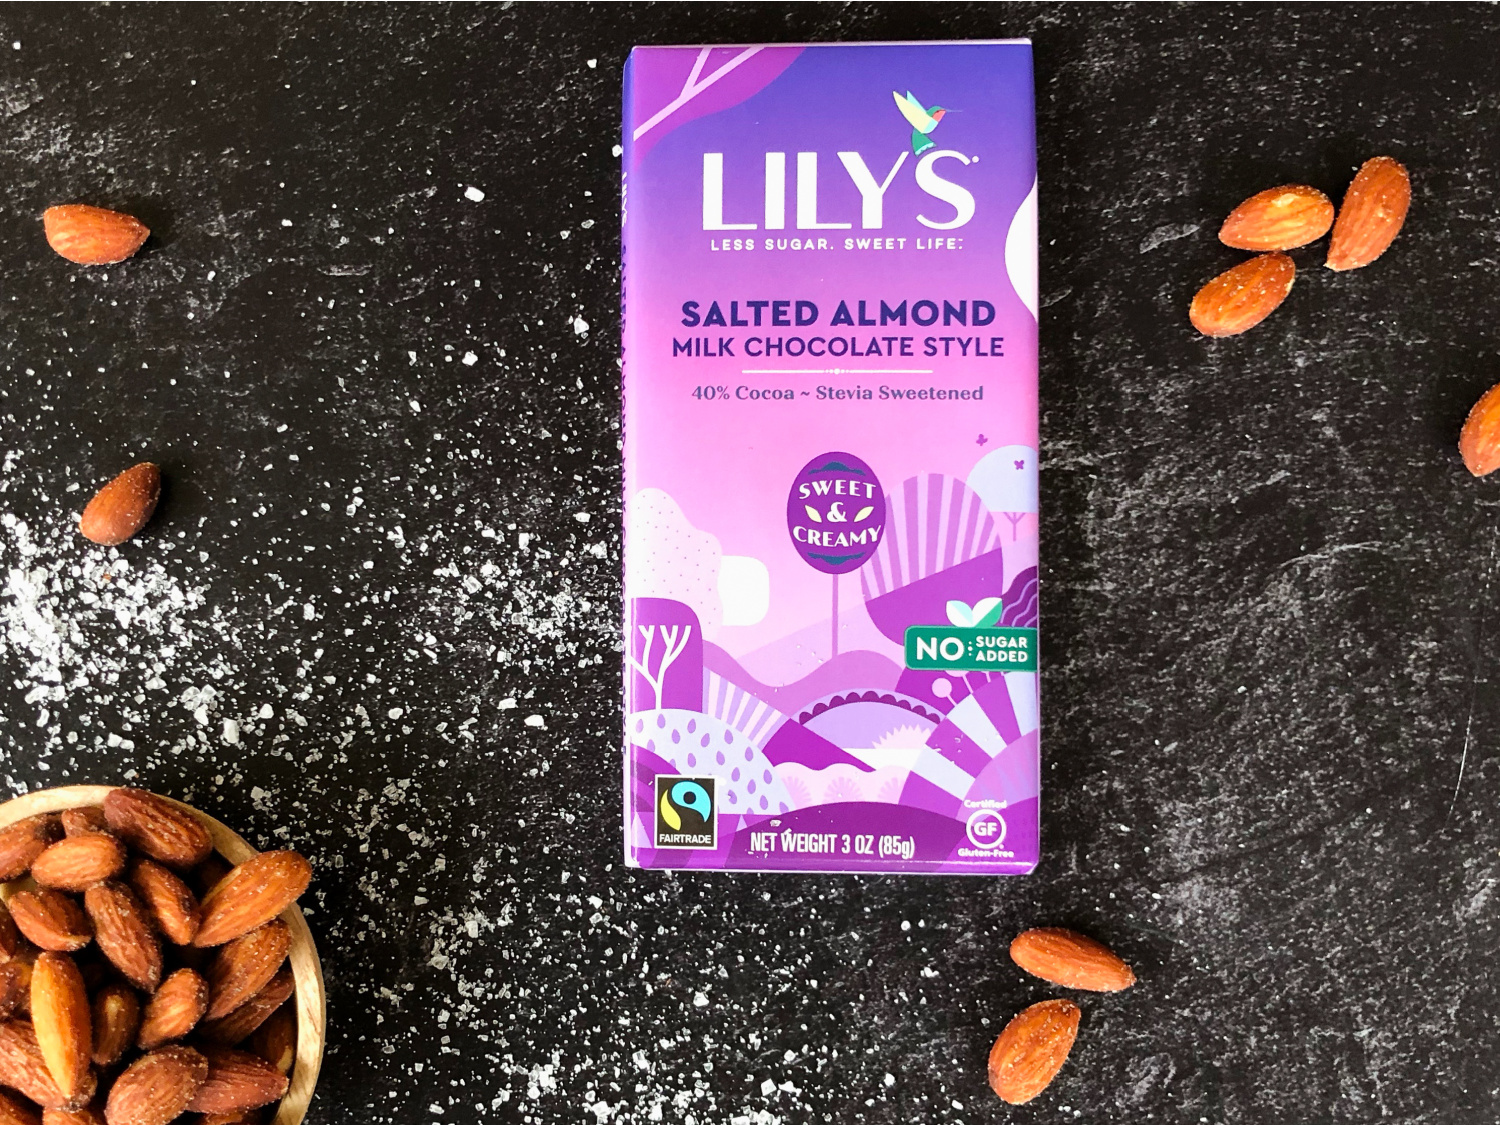 Lily’s Chocolate Bars Just $1.15 At Publix (Regular Price $4.29)